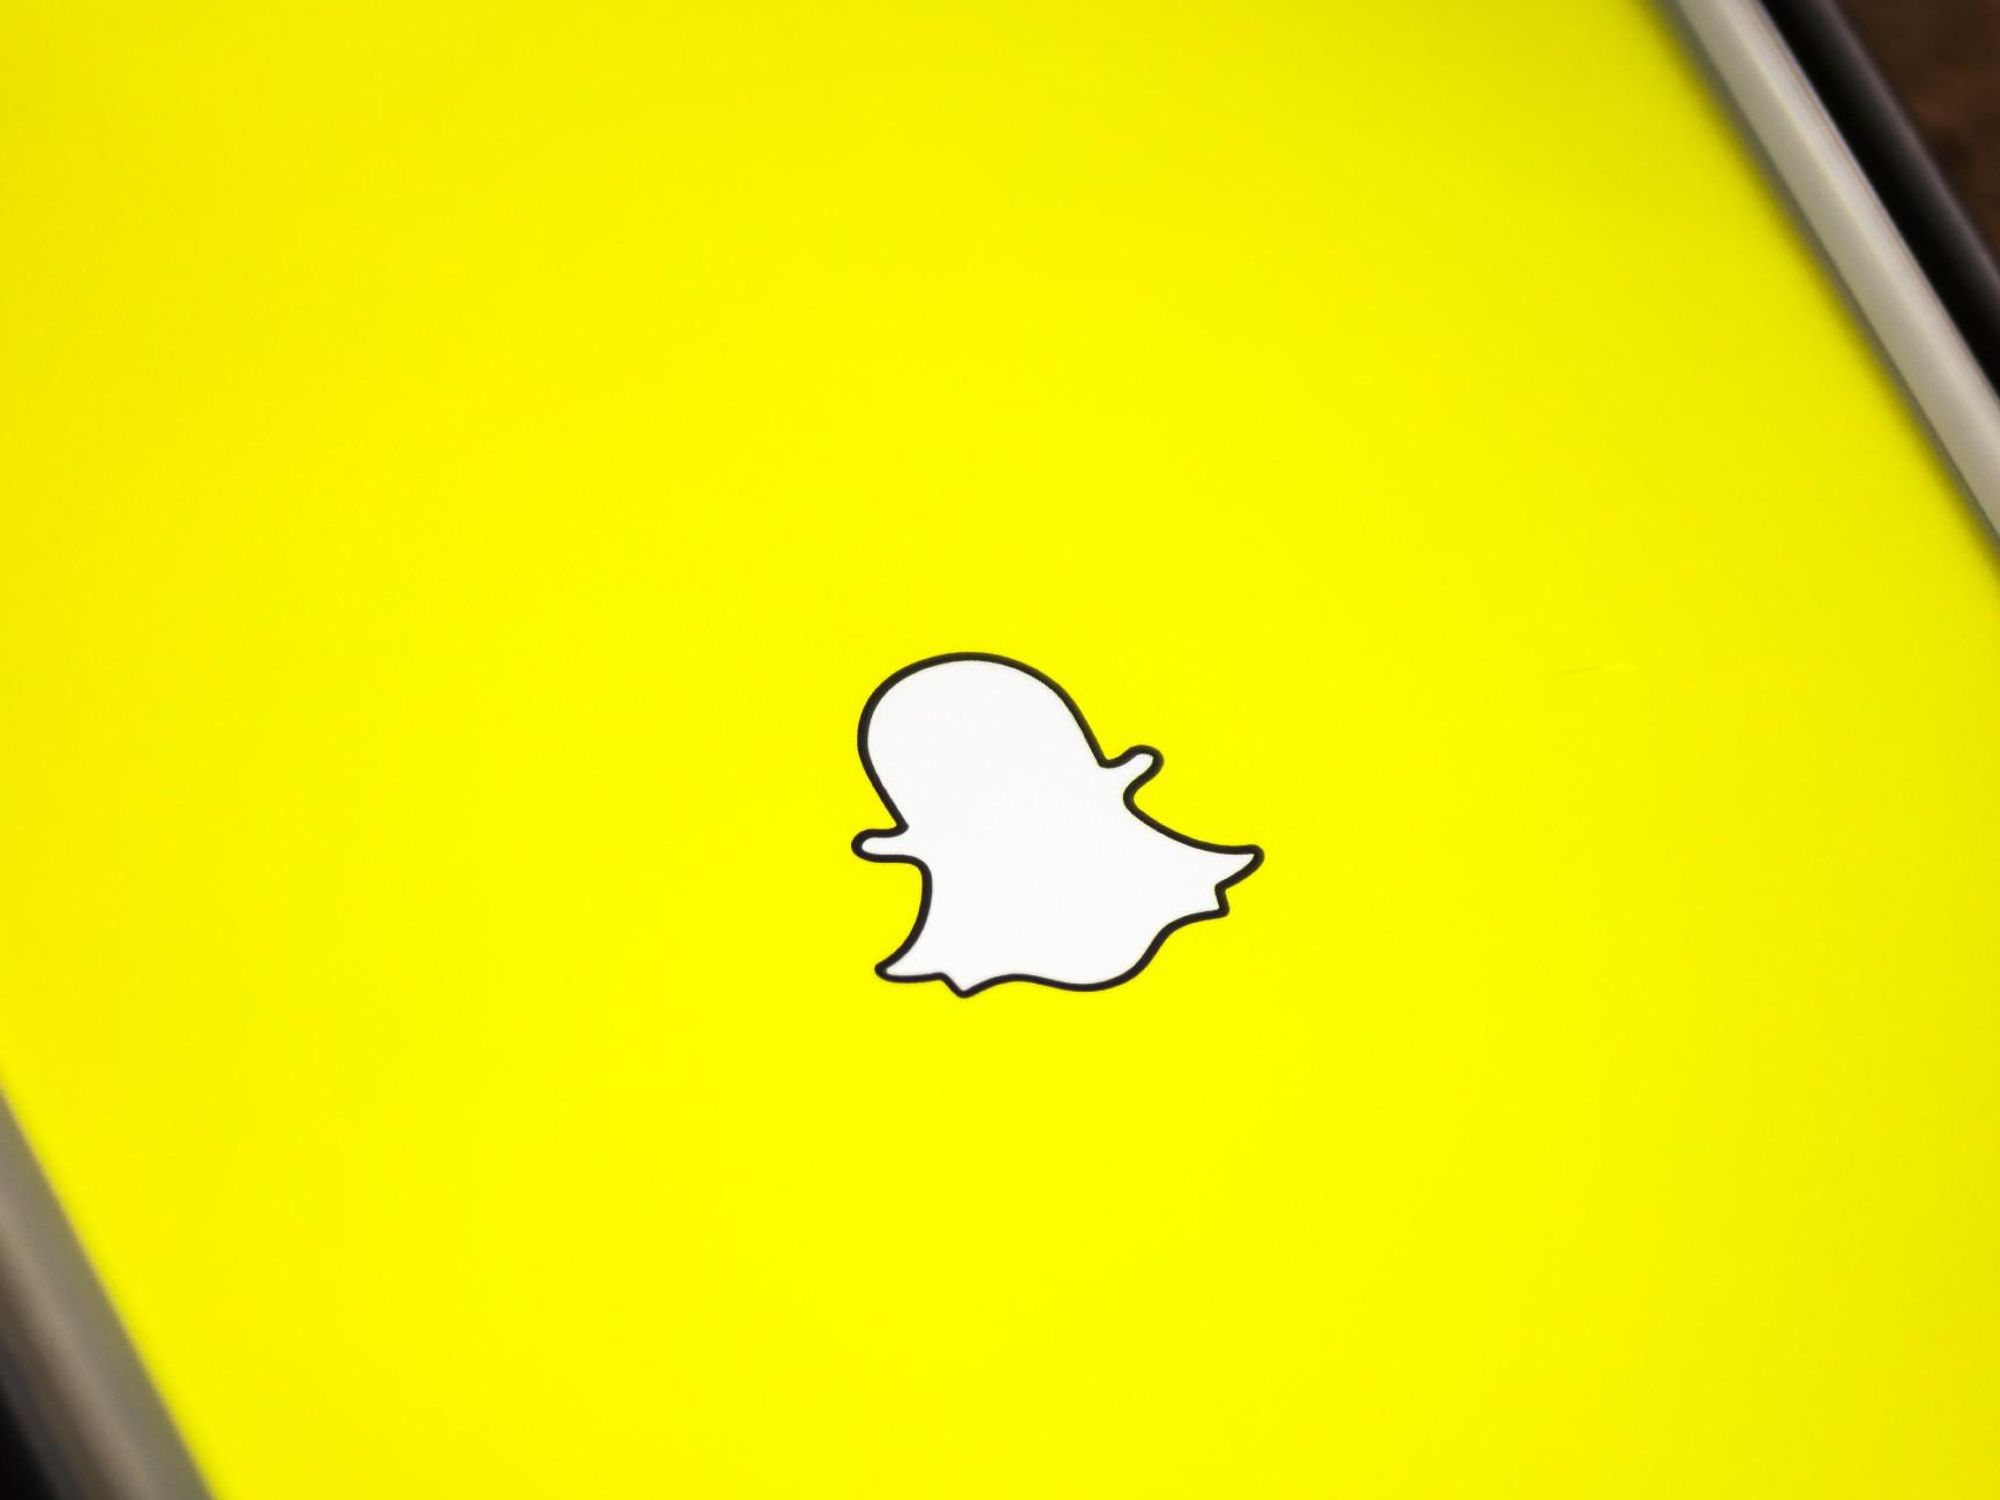 'A Multi-Billion Dollar Platform': How Snap Plans to Turn Its Map Feature Into a Cash Cow